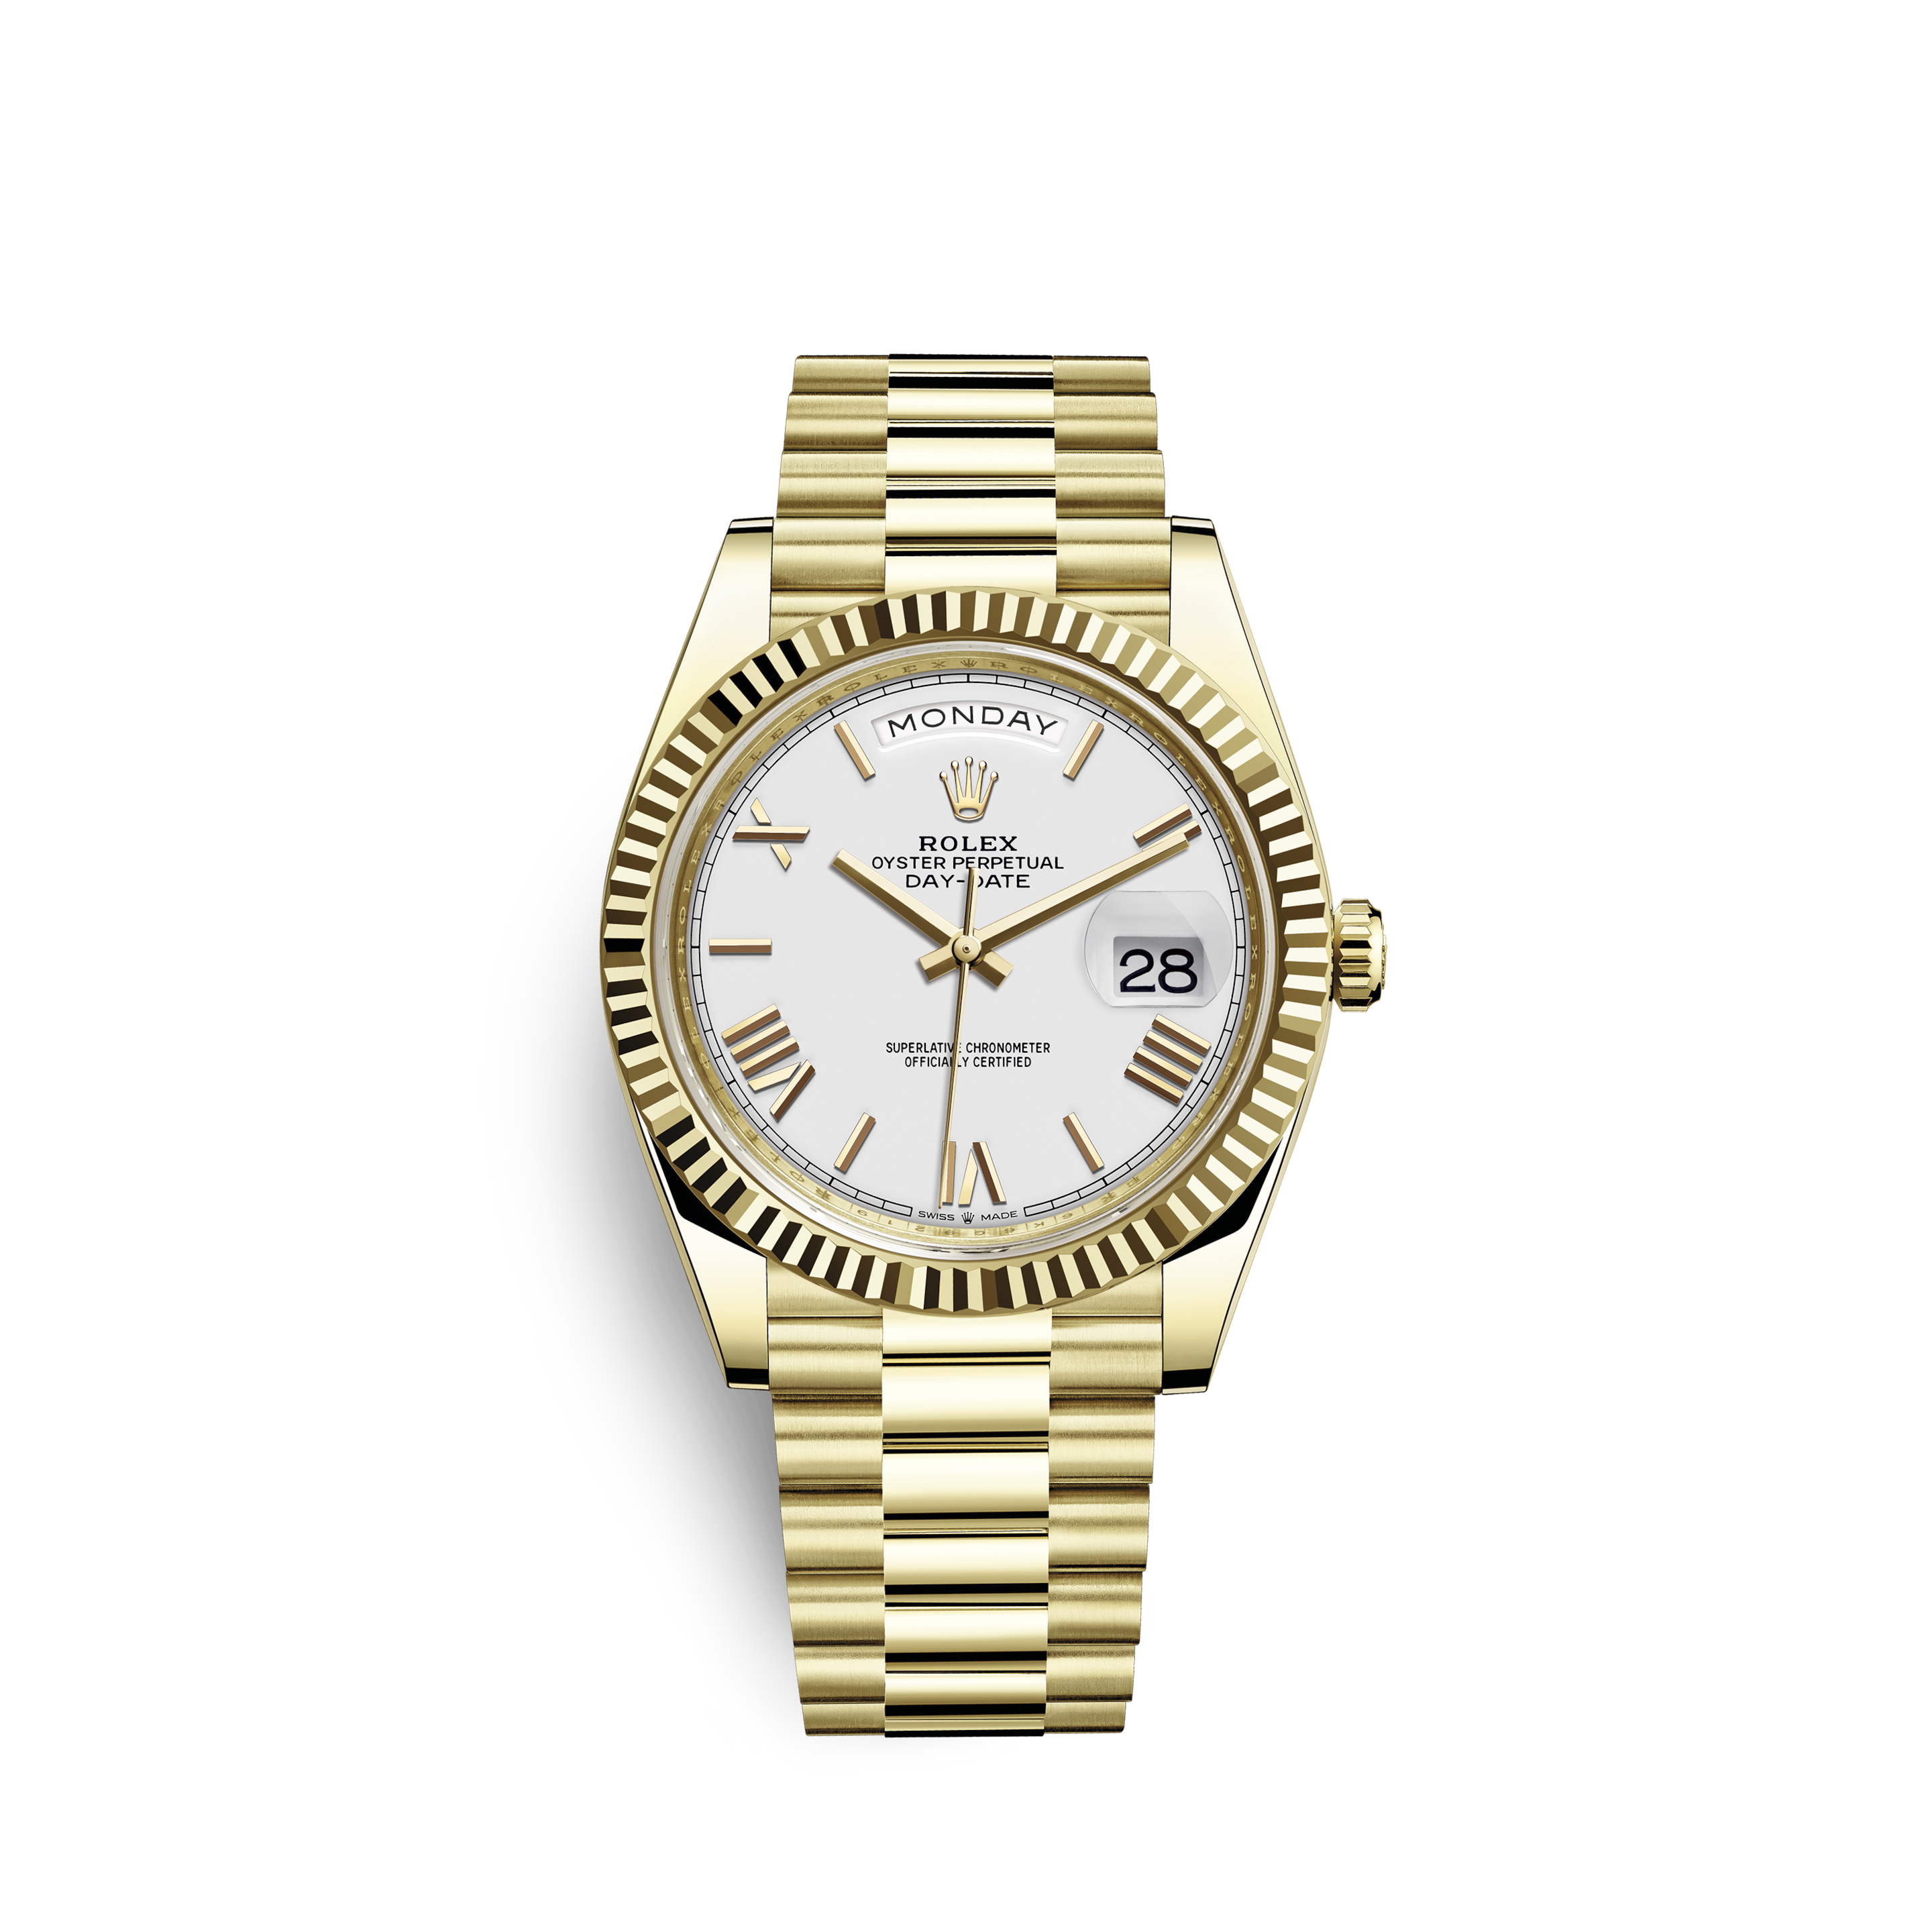 Rolex President Day-Date Men's 18k Gold Watch with Diamonds 118338Rolex Oyster Perpetual Datejust Silver Diamond Dial Gold Bezel Stainless Steel 36mm Watch